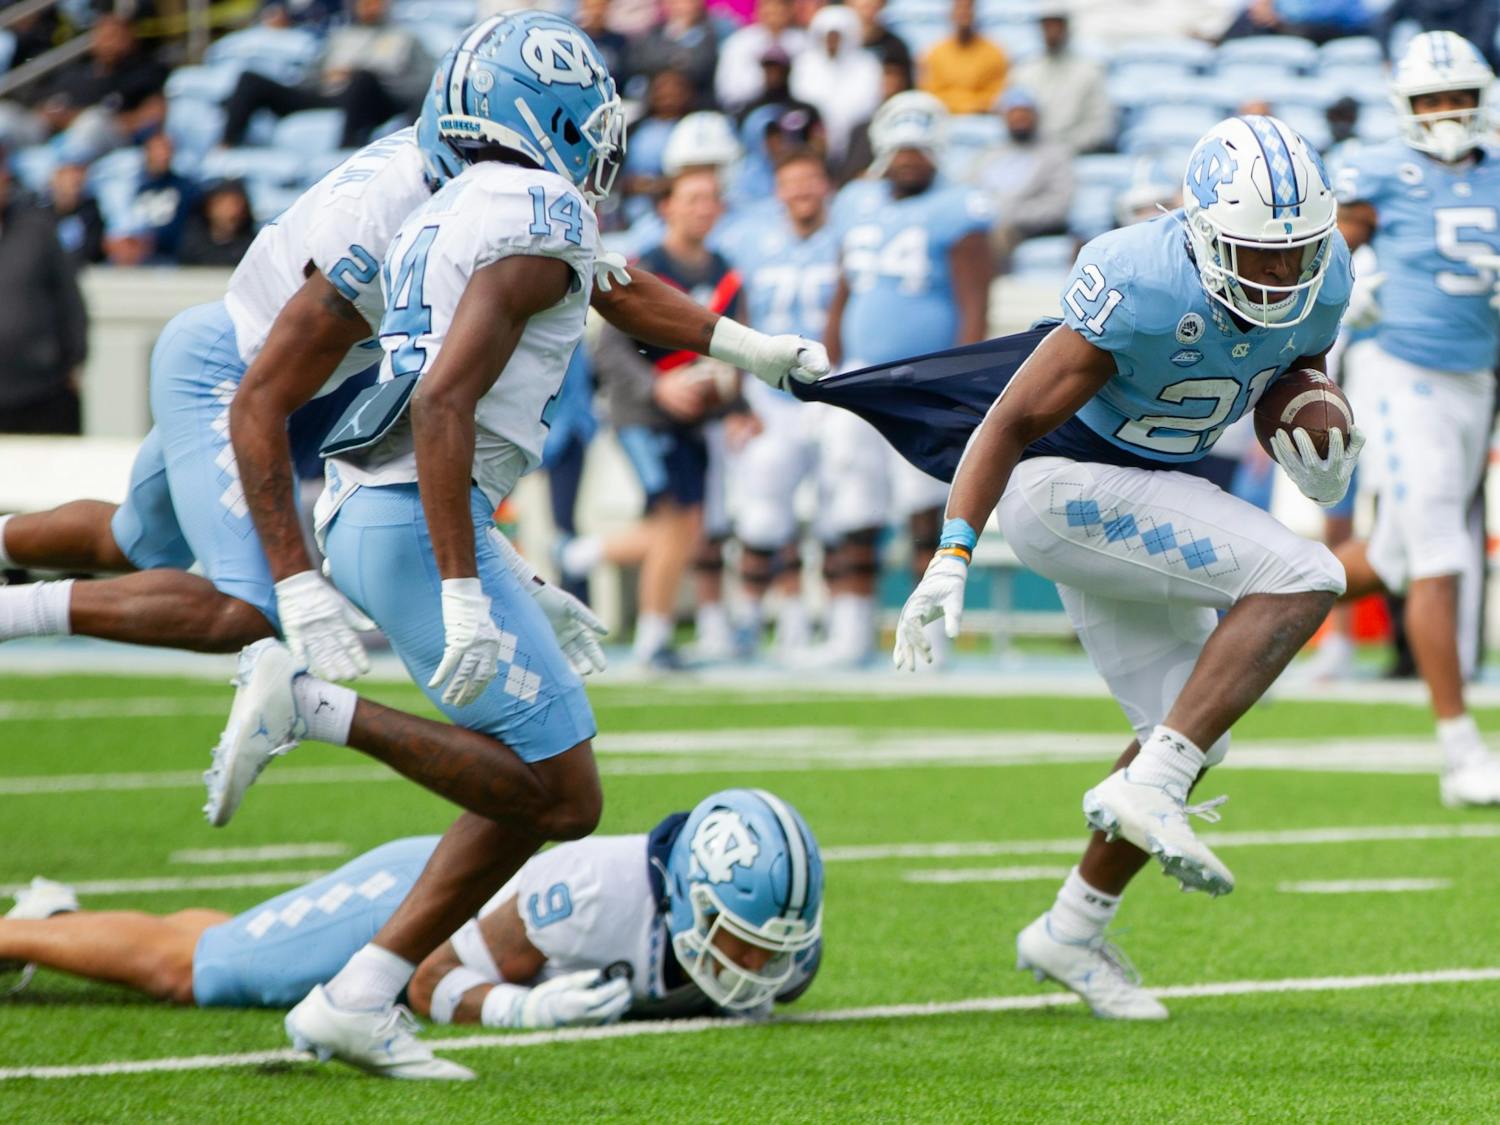 Elijah Green (21), sophomore running back, works to make a play during UNC football's spring scrimmage on April 9, 2022, in Chapel Hill, NC.